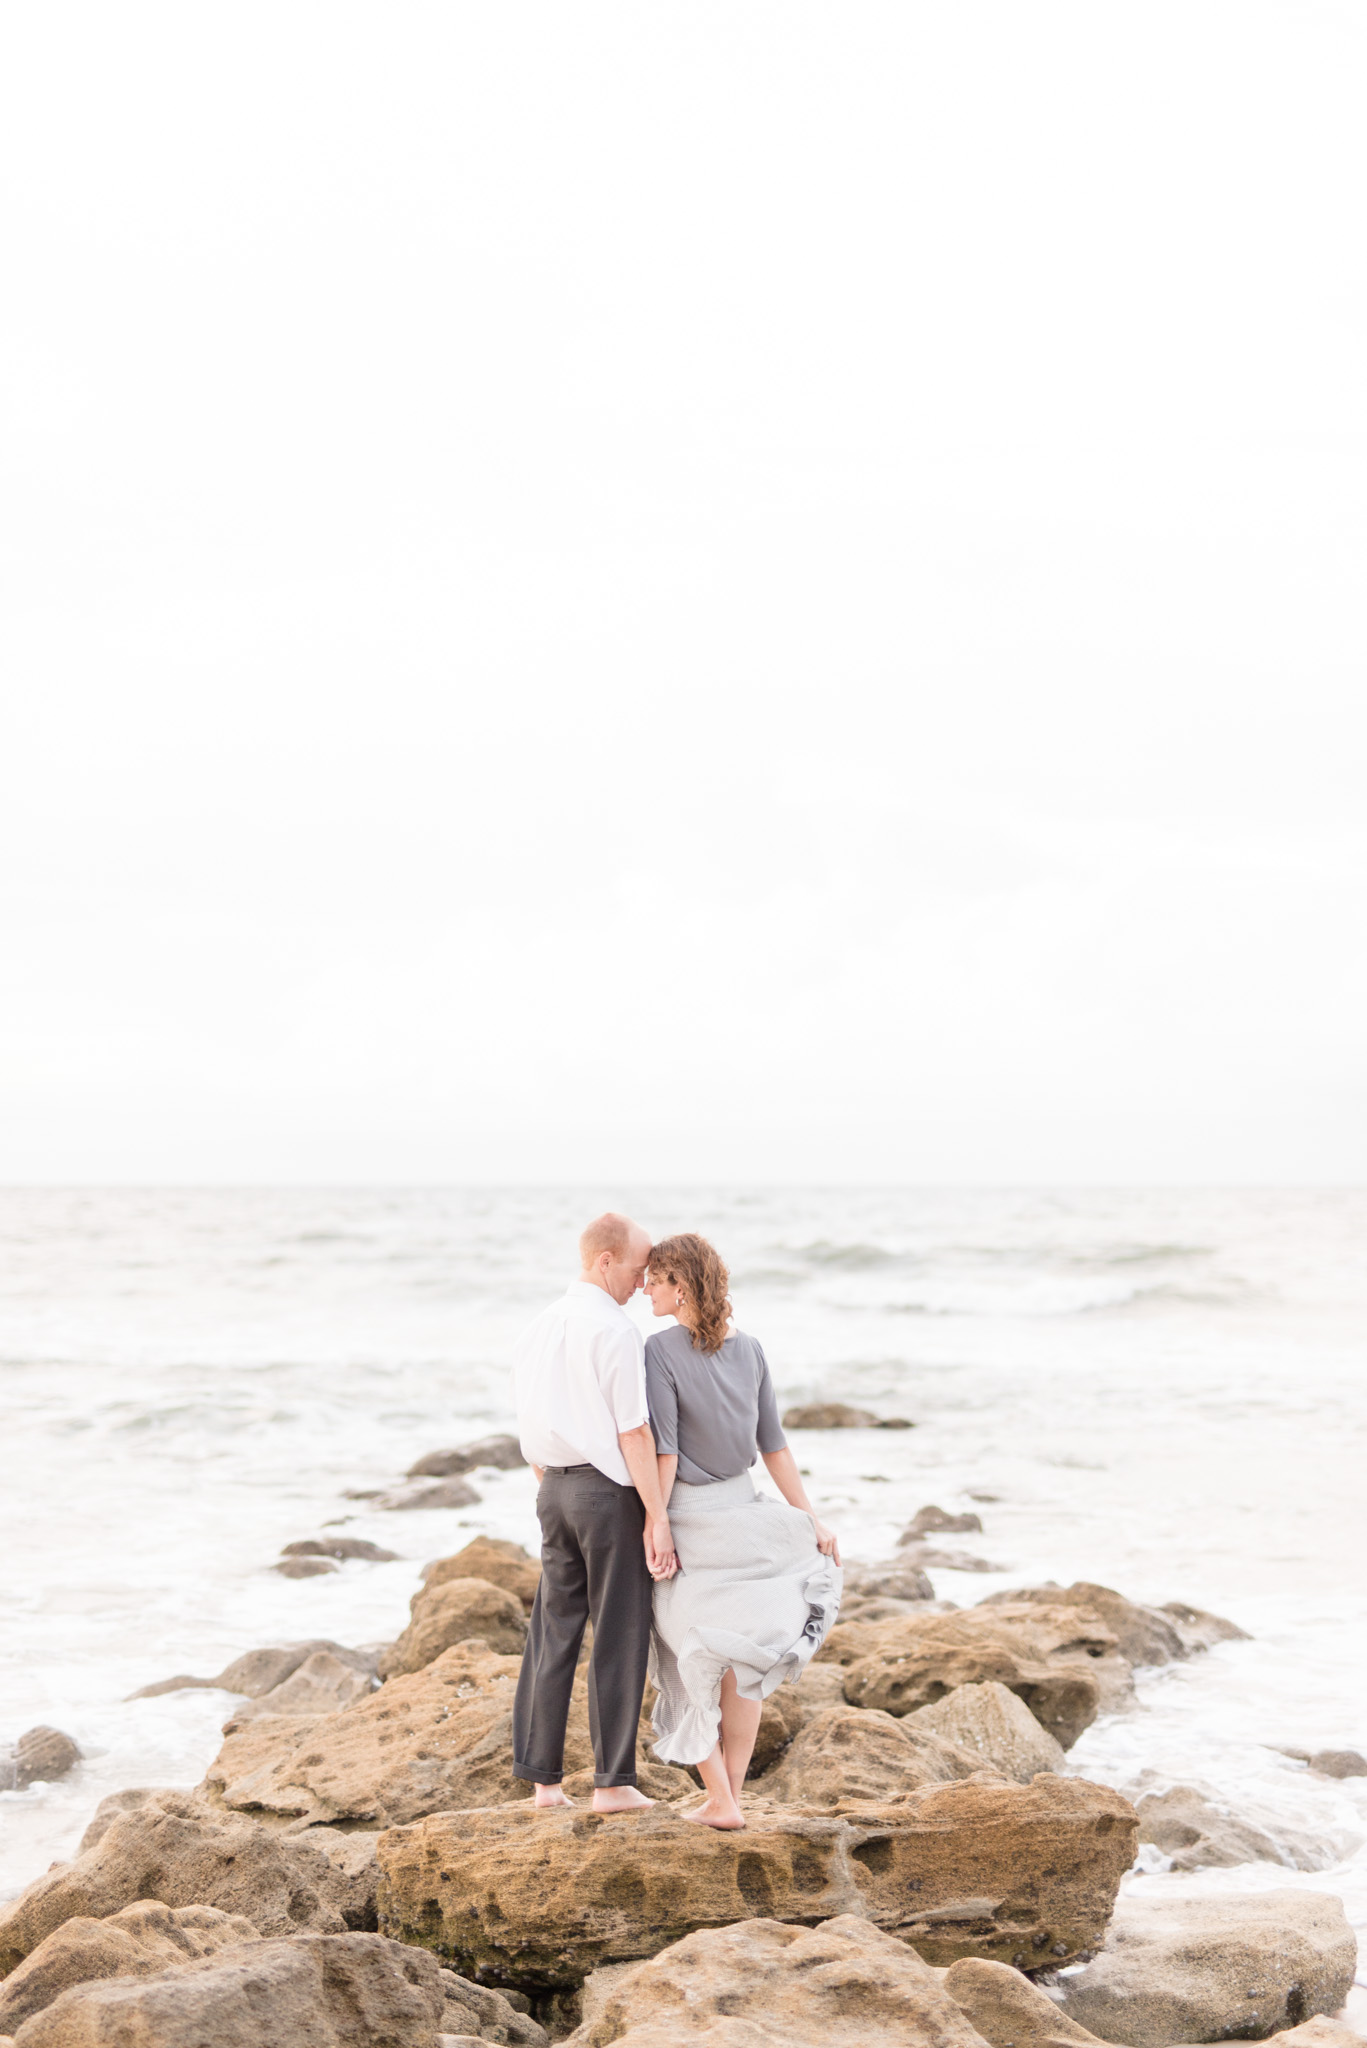 Couple stands on rocks by sea.